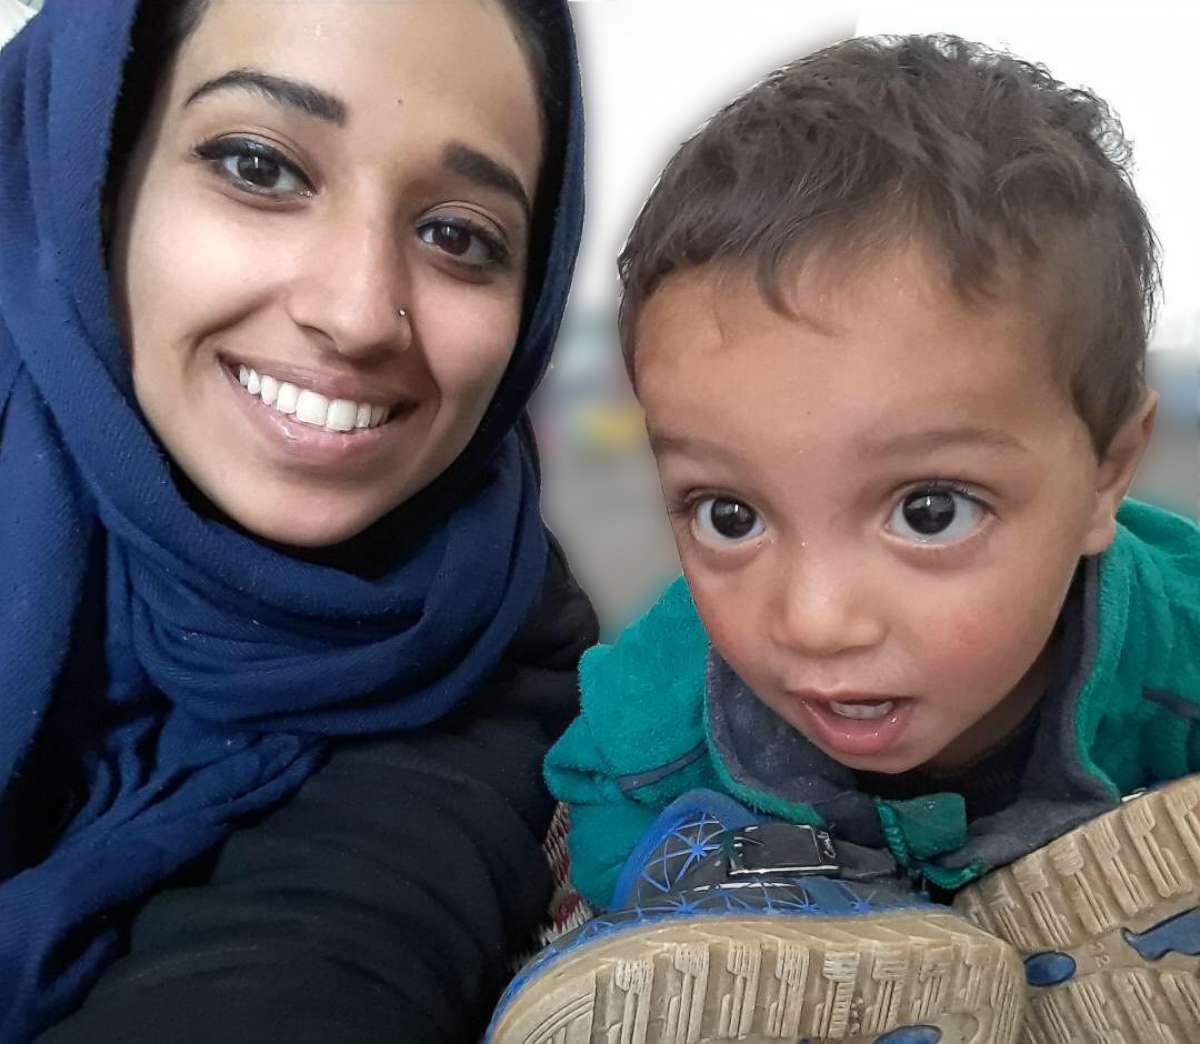 PHOTO: Hoda Muthana is pictured with her 18-month-old son. She left Alabama four years at the age of 19 to marry an ISIS fighter. Now, she wants to return to the U.S.